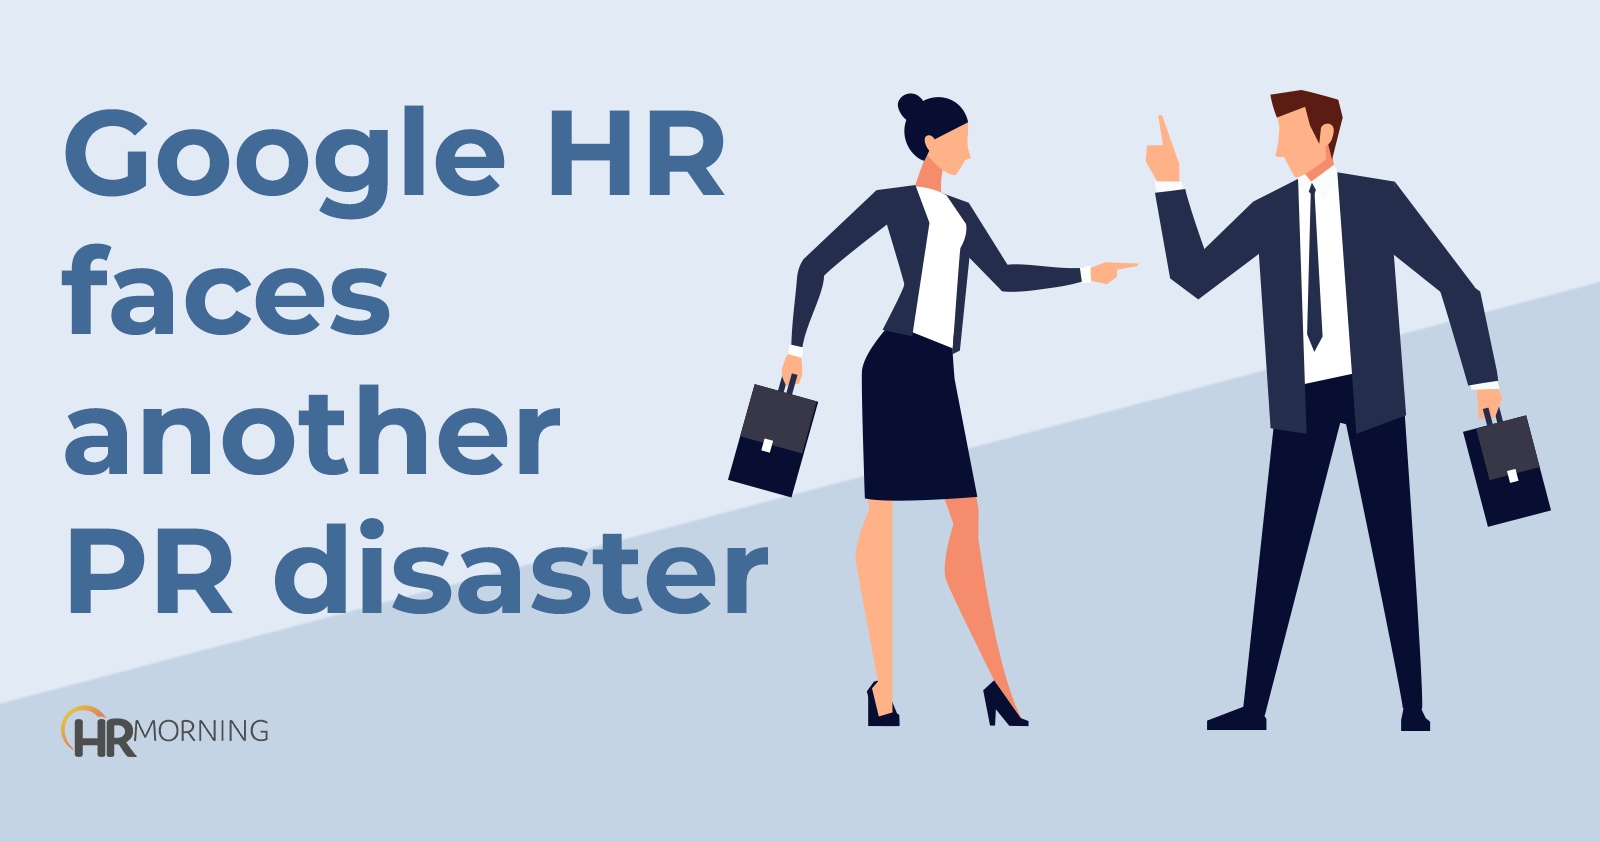 Google HR faces another PR disaster